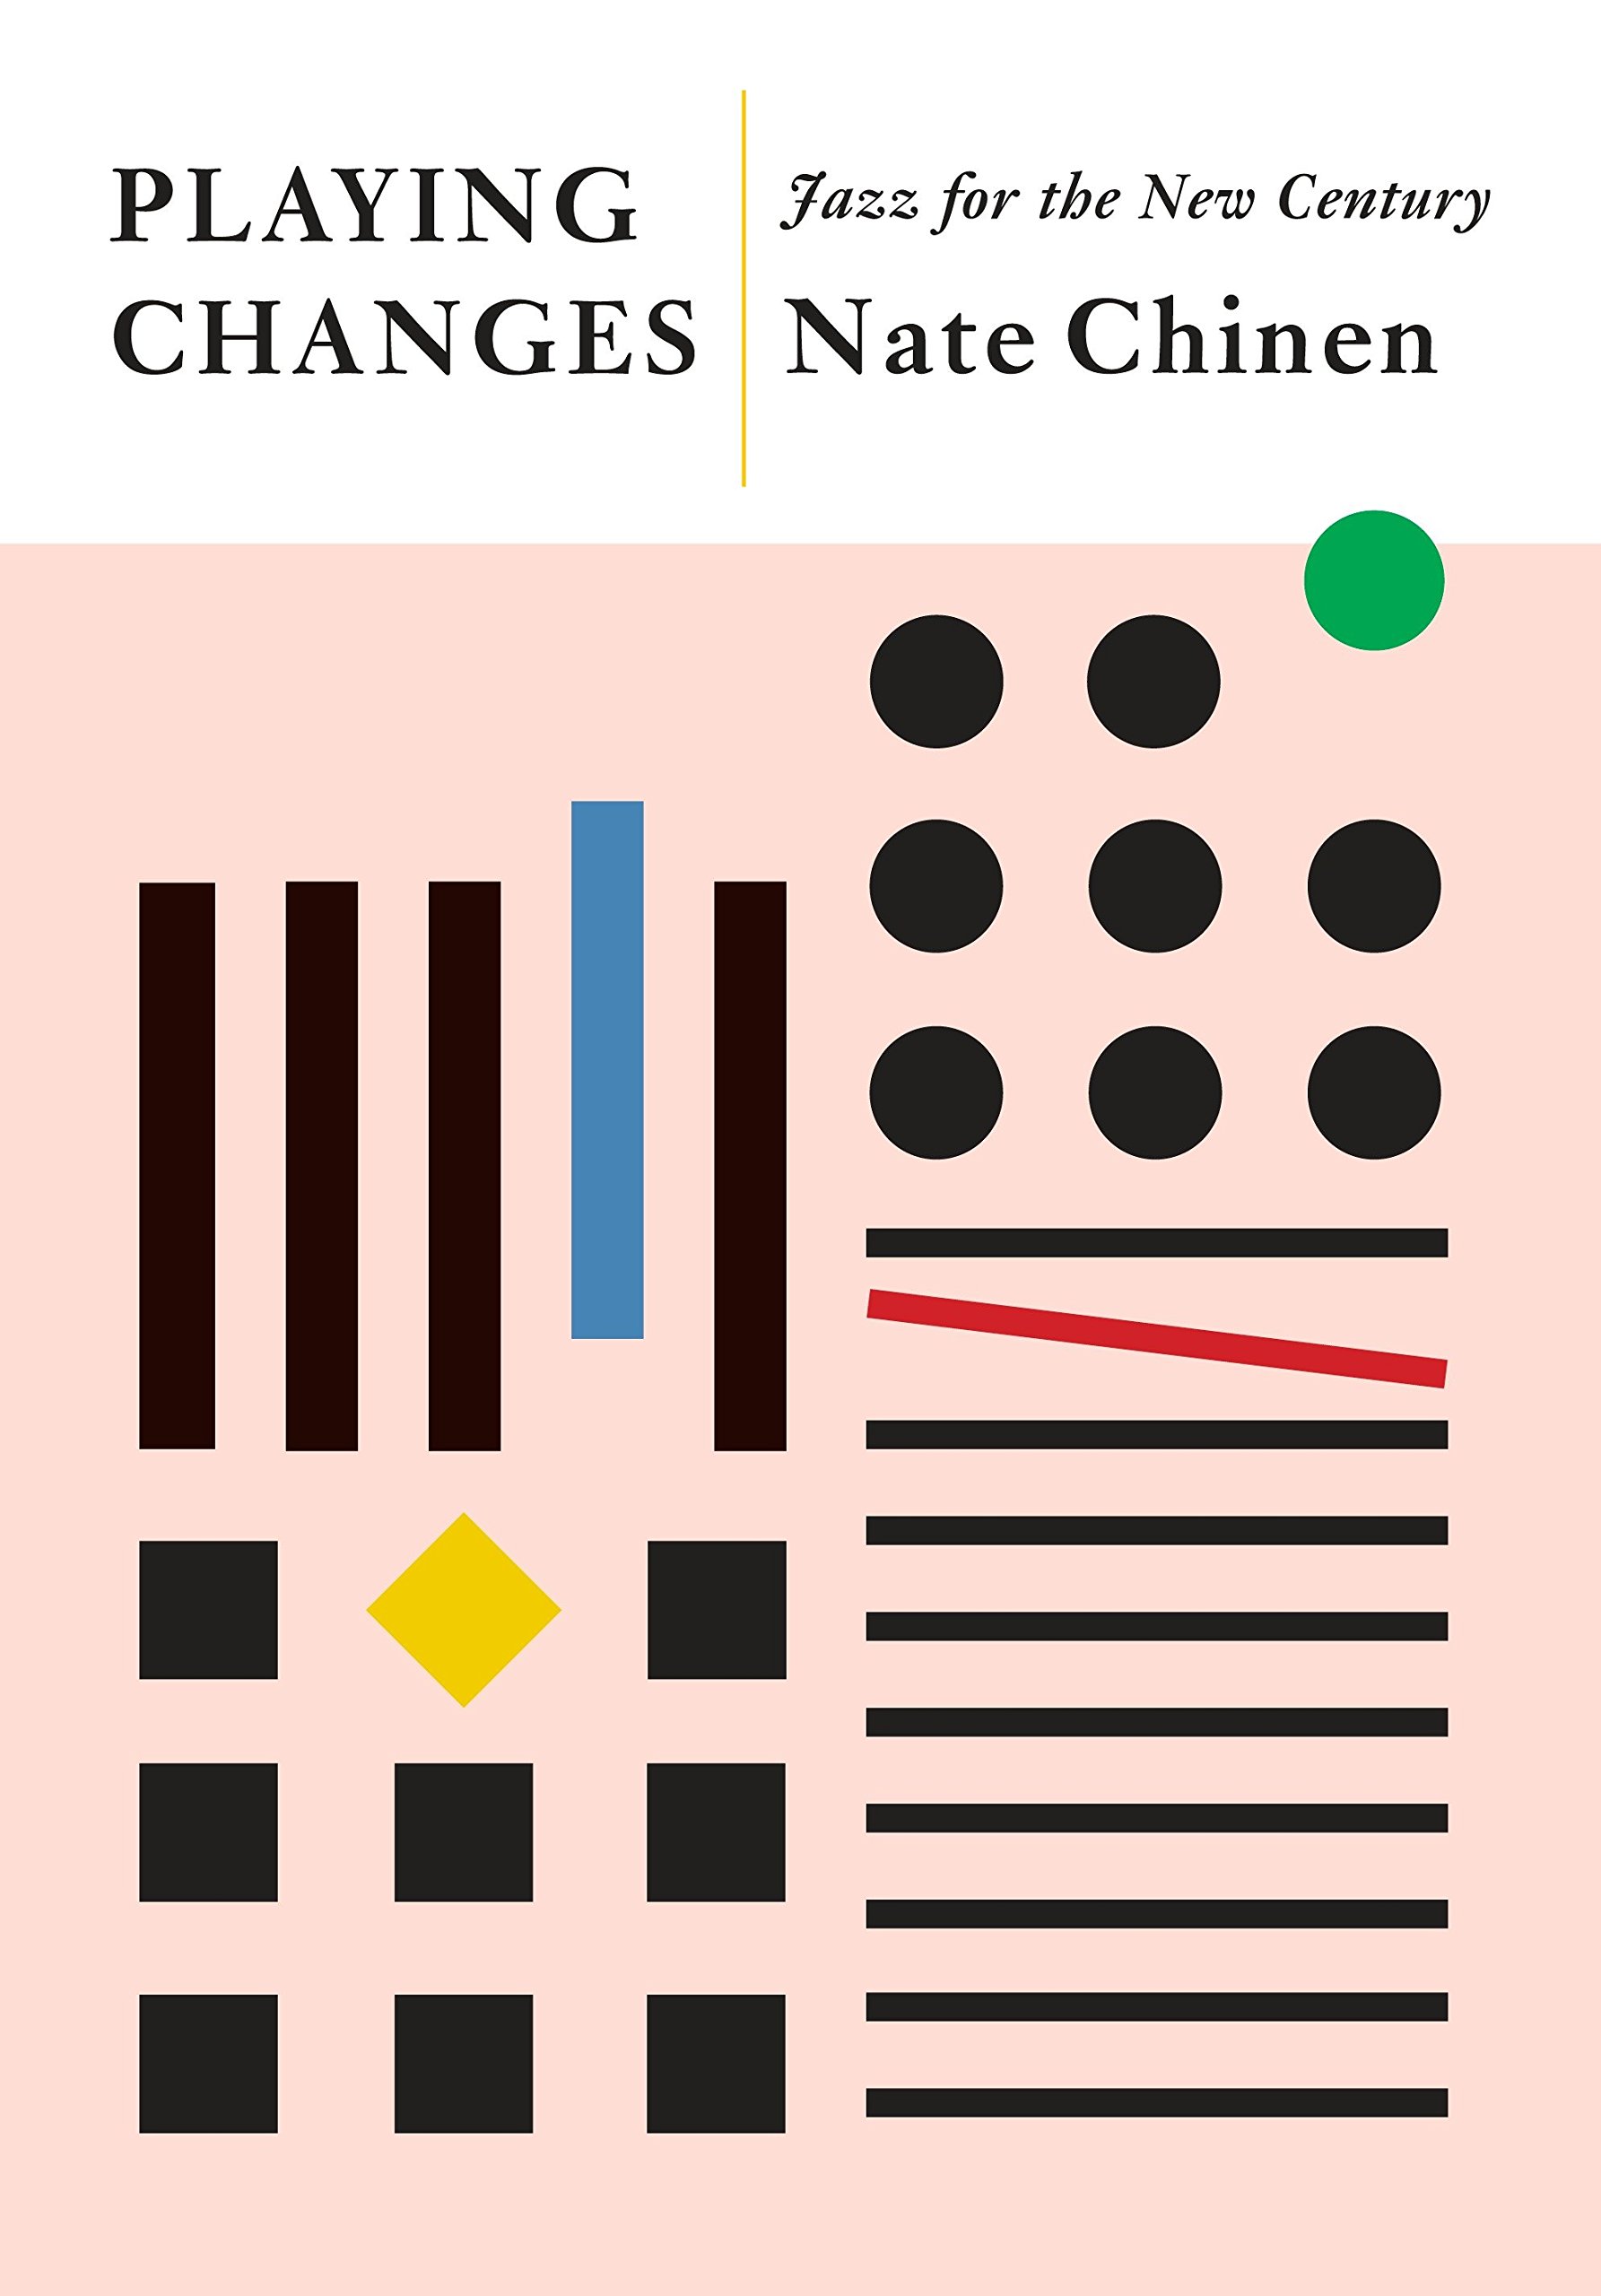 Playing changes (2018)